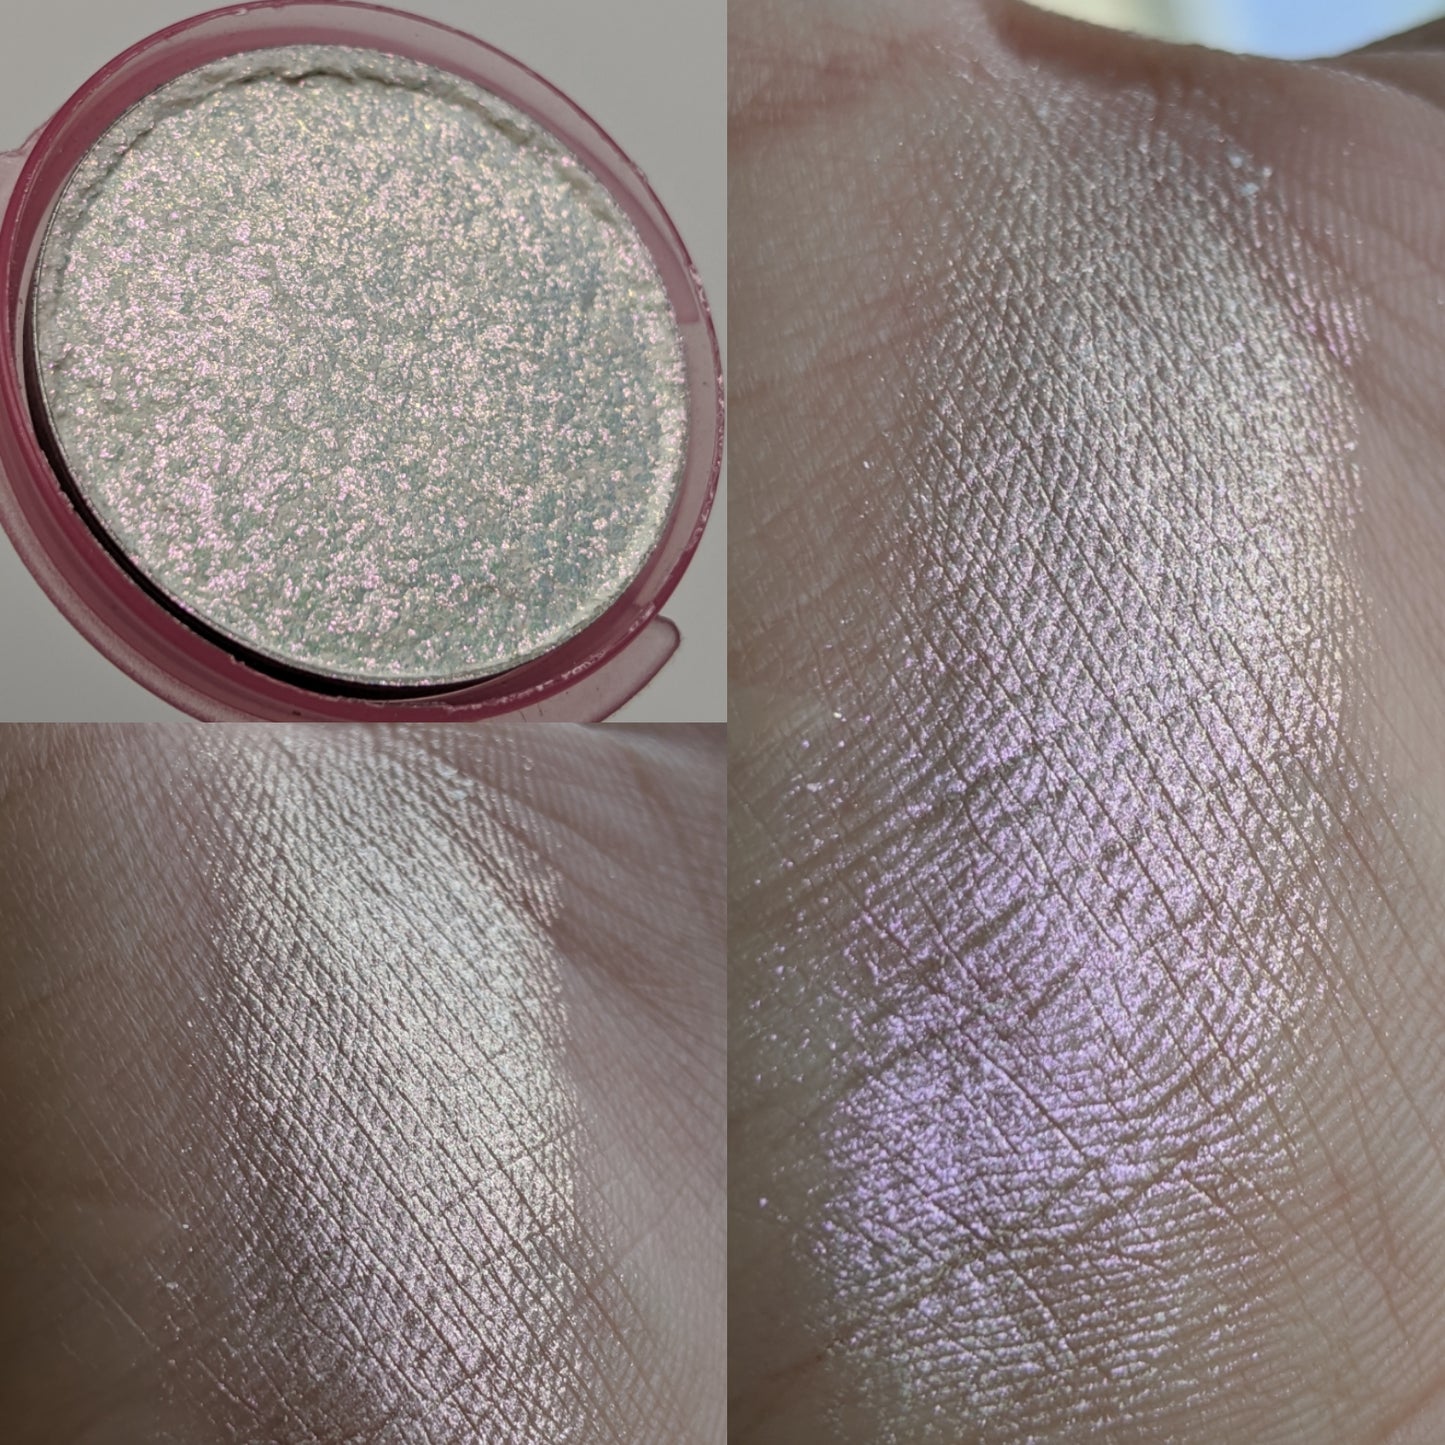 Prickly Pear - Eyeshadow Topper Highlighter Multichrome Red Green Gold Violet Duochrome Trichrome